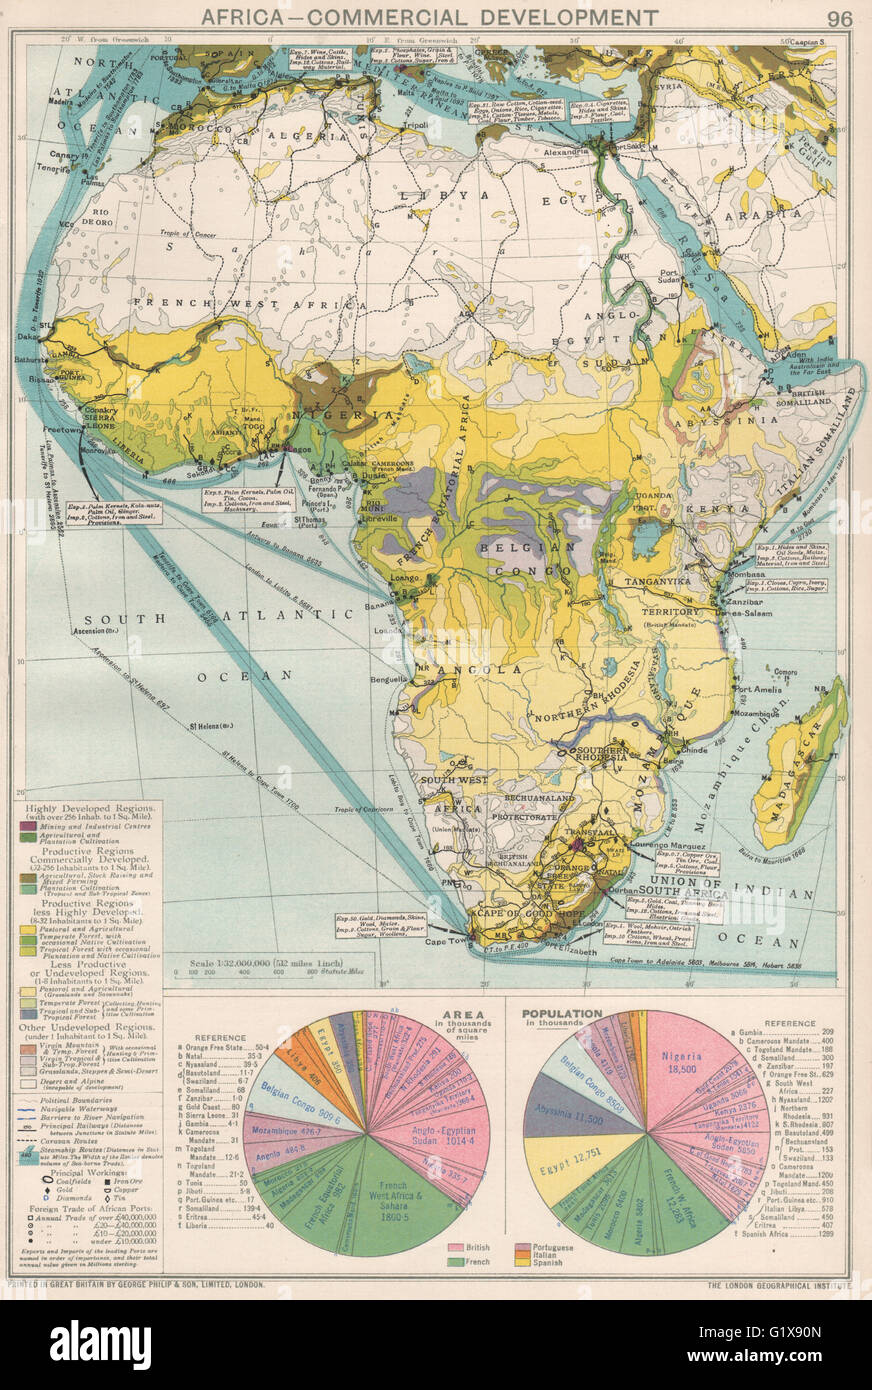 Africa. Commercial Development. Import & export routes. Mining, 1925 old map Stock Photo